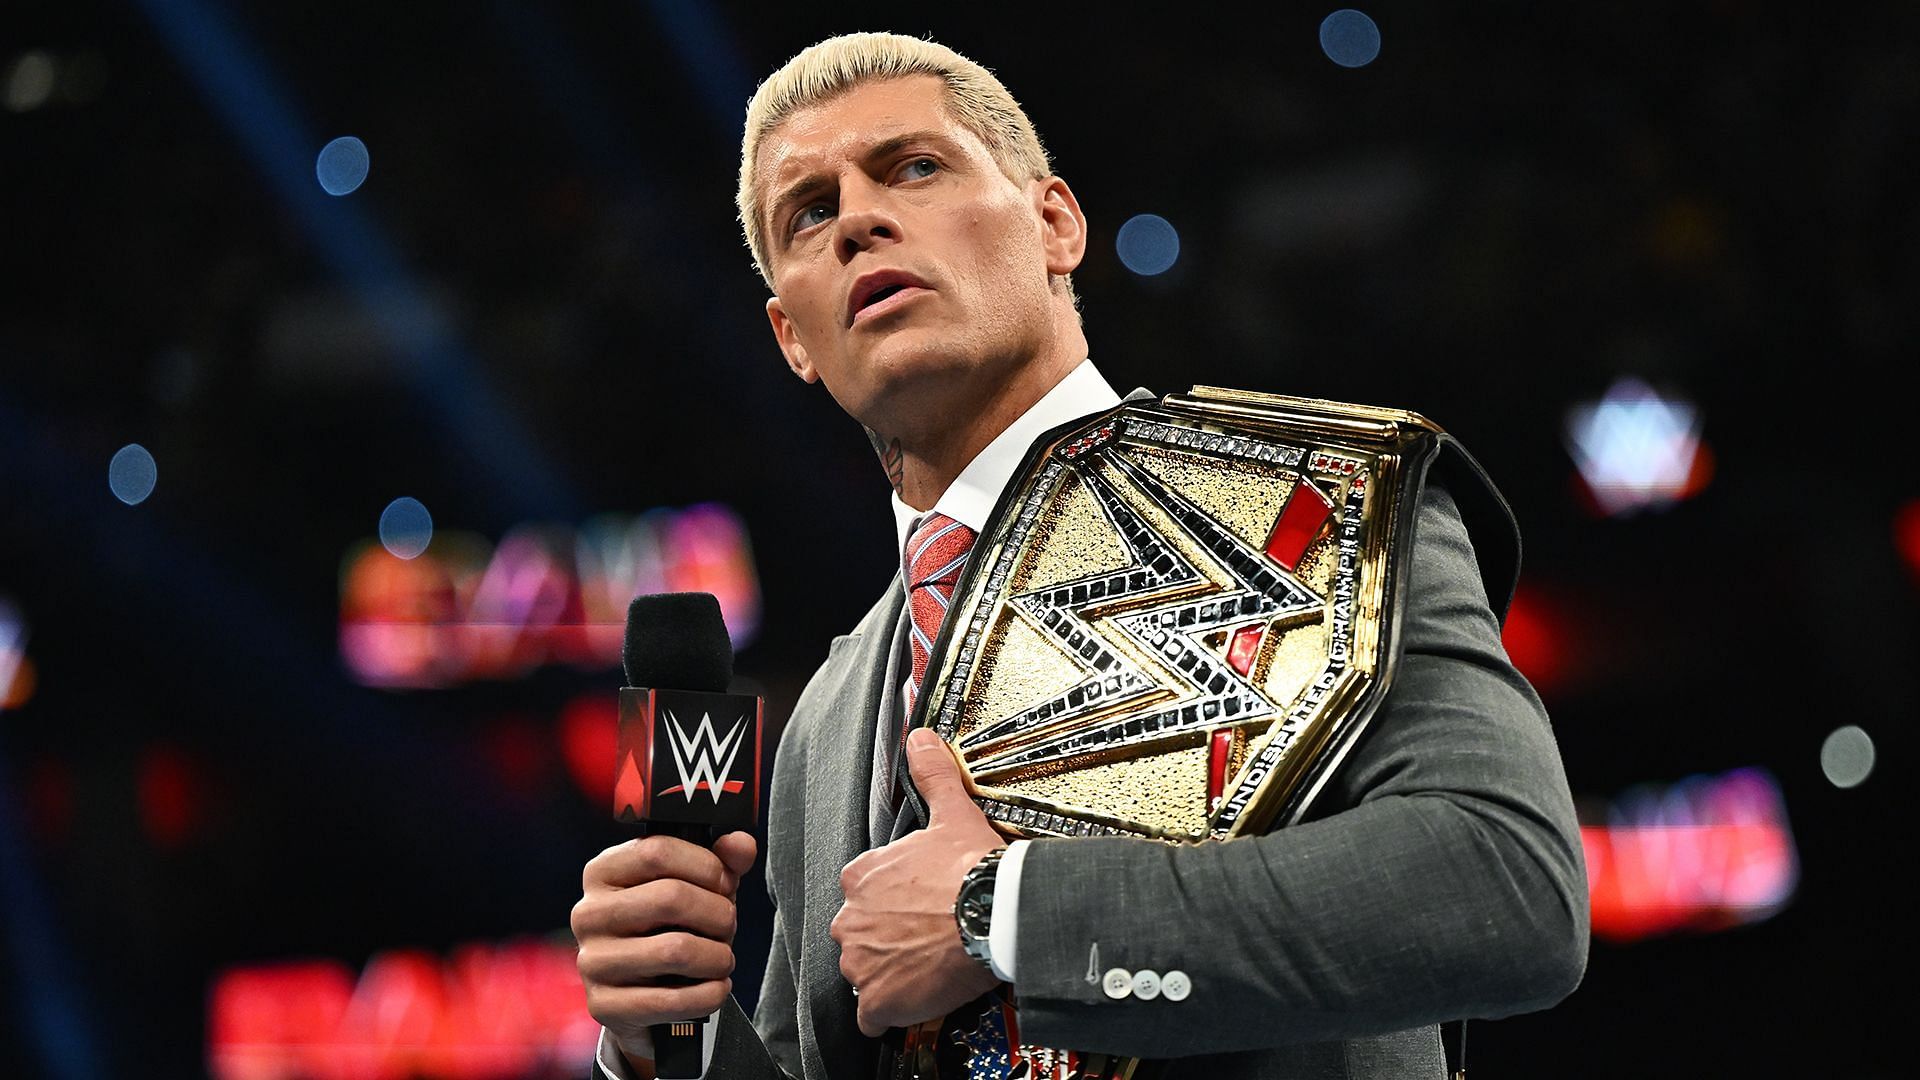 Cody Rhodes is in his first reign as WWE world champion 